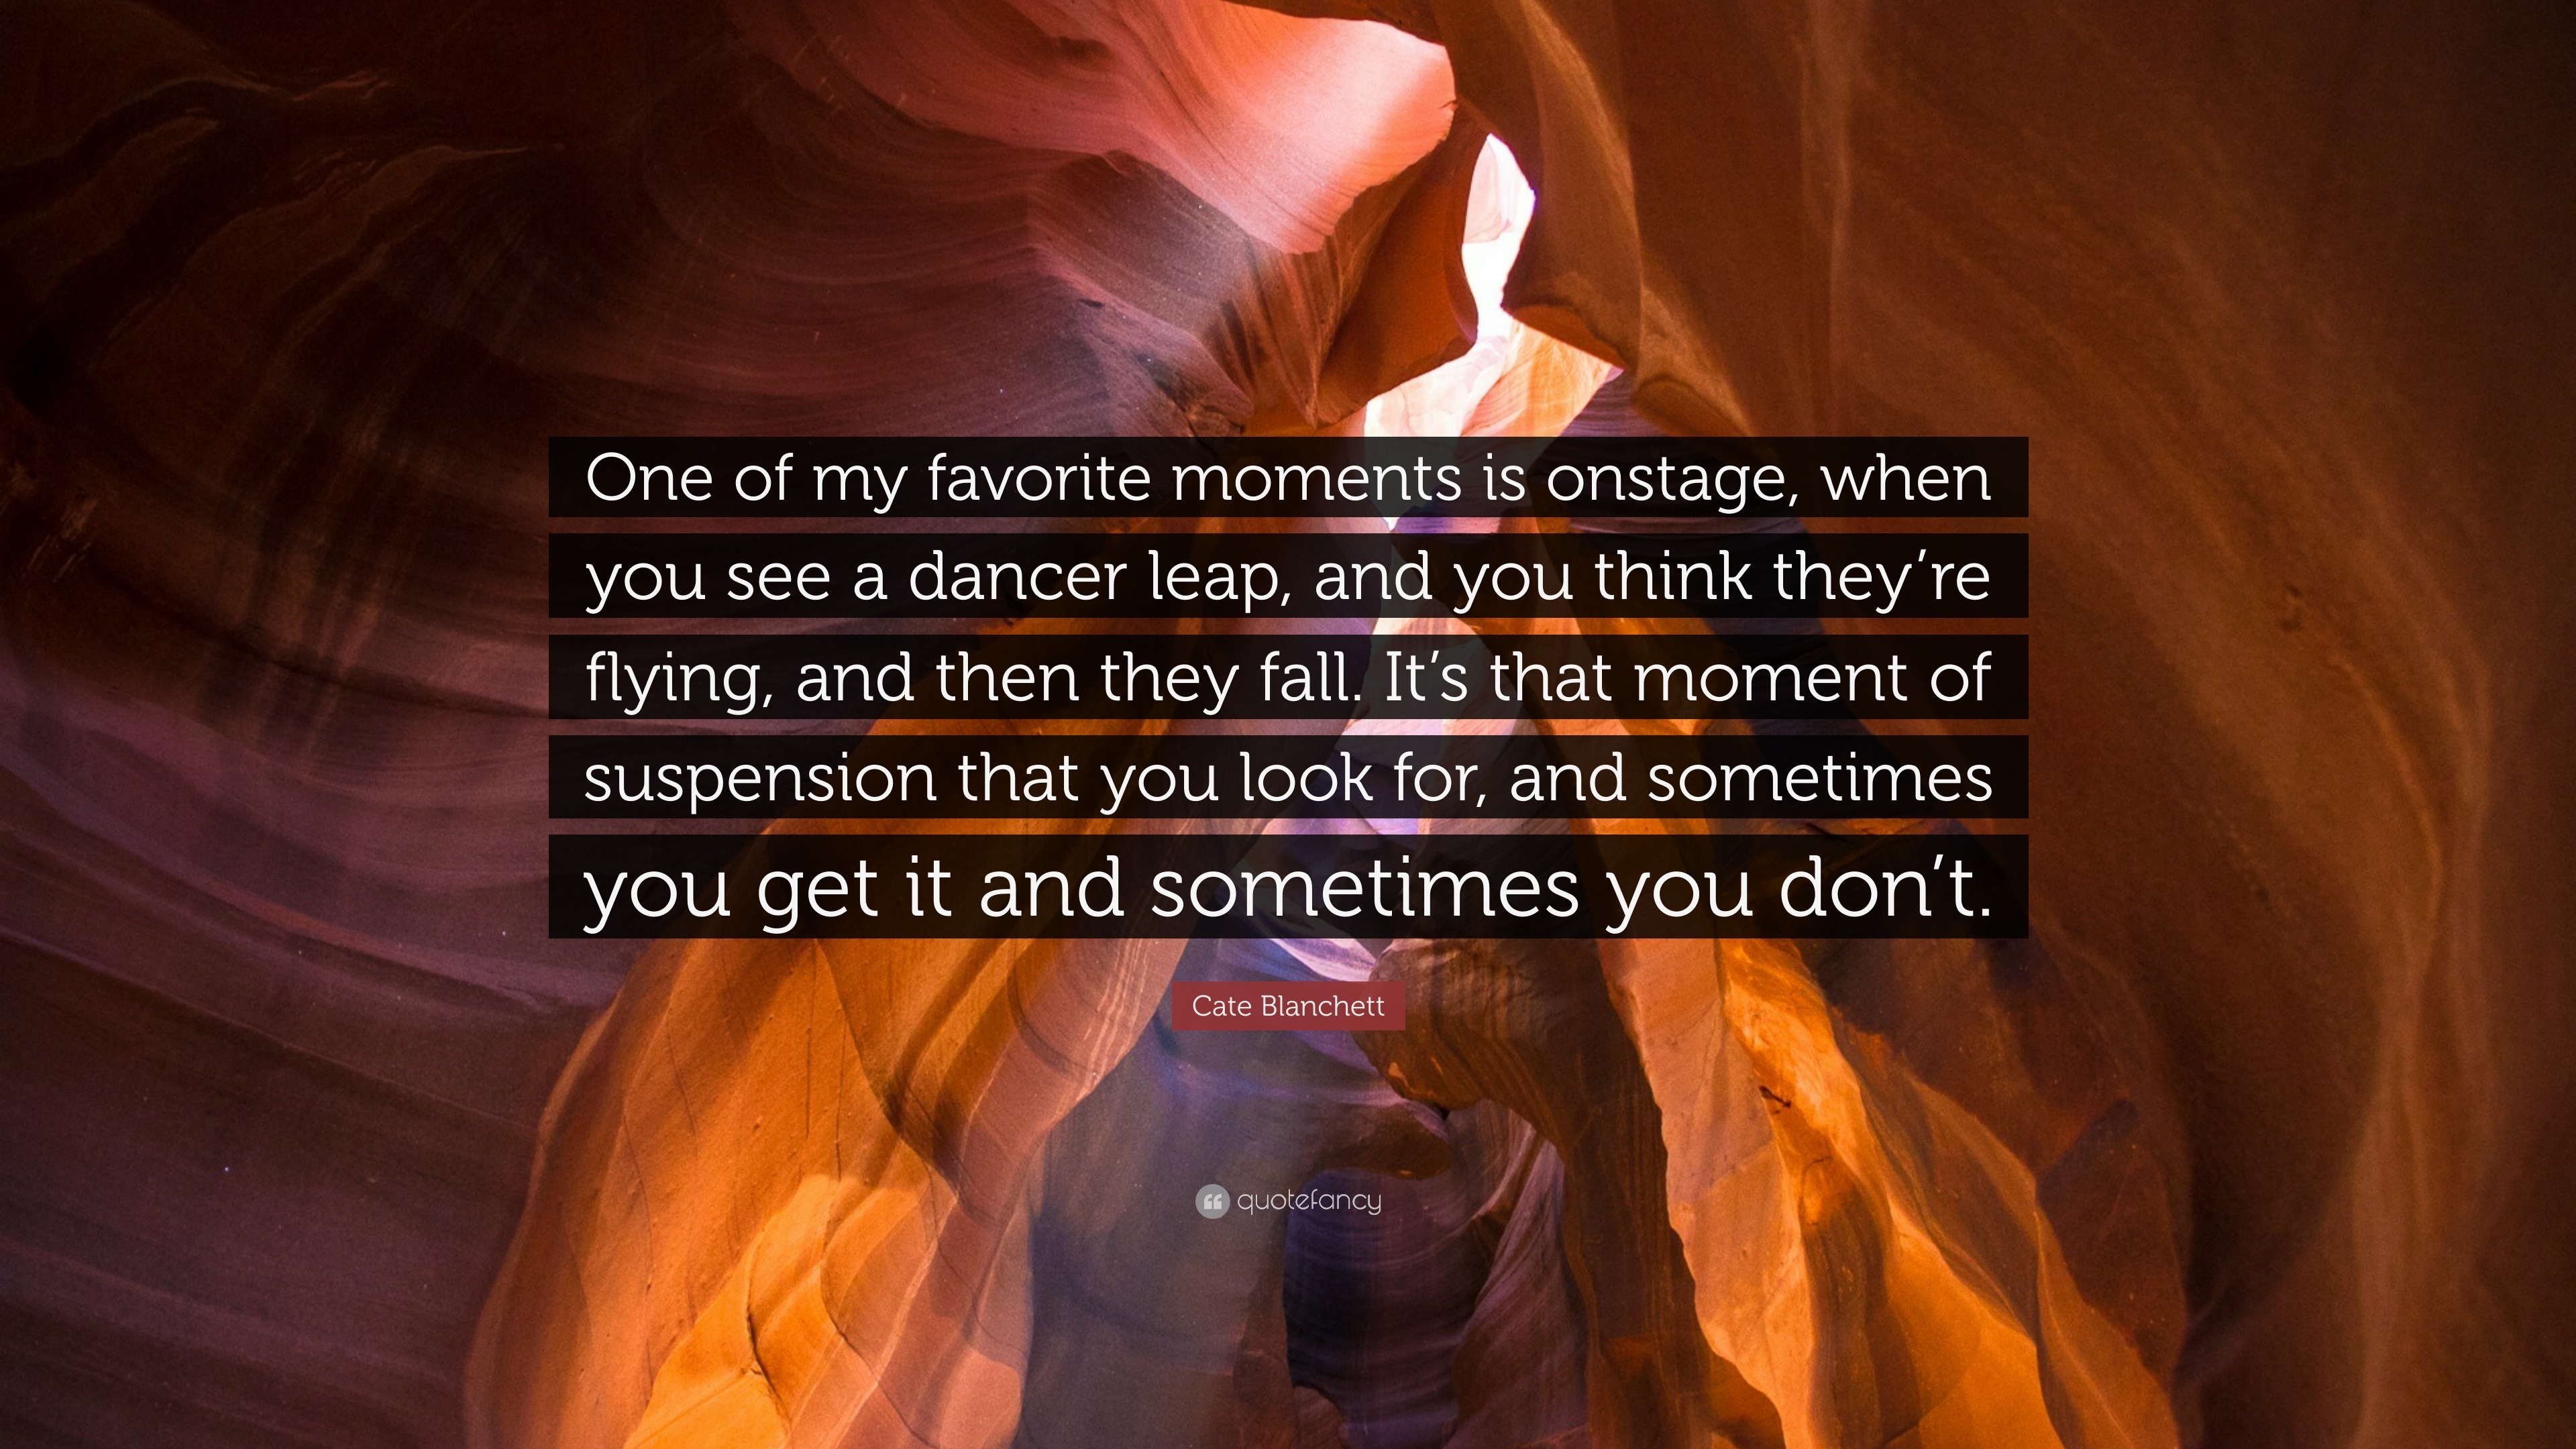 Cate Blanchett Quote One Of My Favorite Moments Is Onstage When You See A Dancer Leap And You Think They Re Flying And Then They Fall It